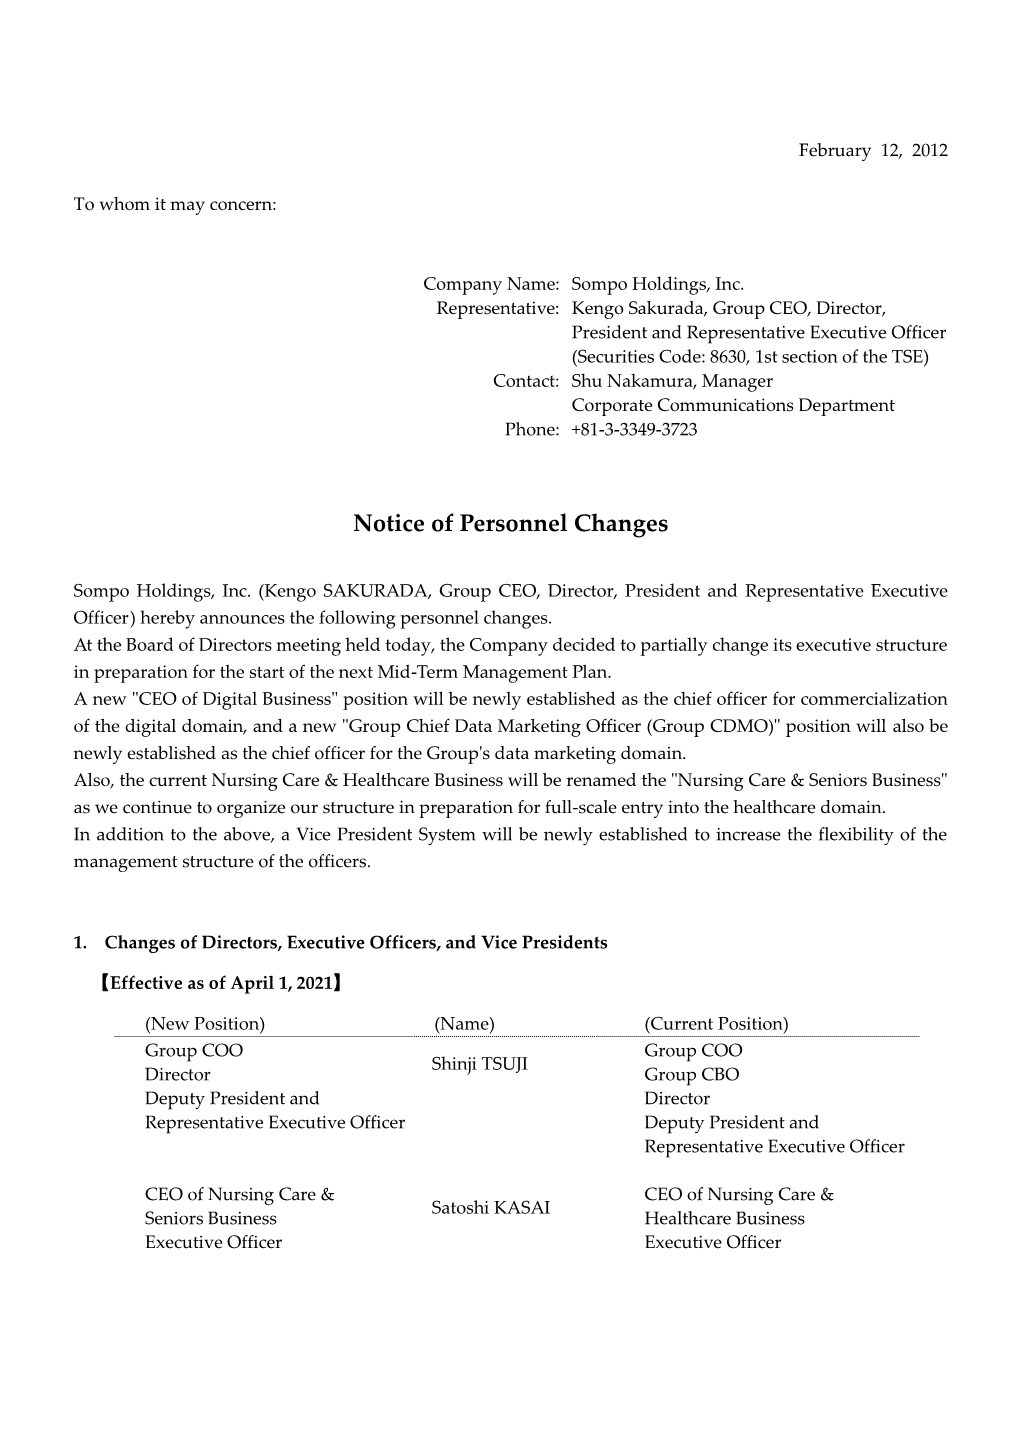 Notice of Personnel Changes Somo Holdings,Inc